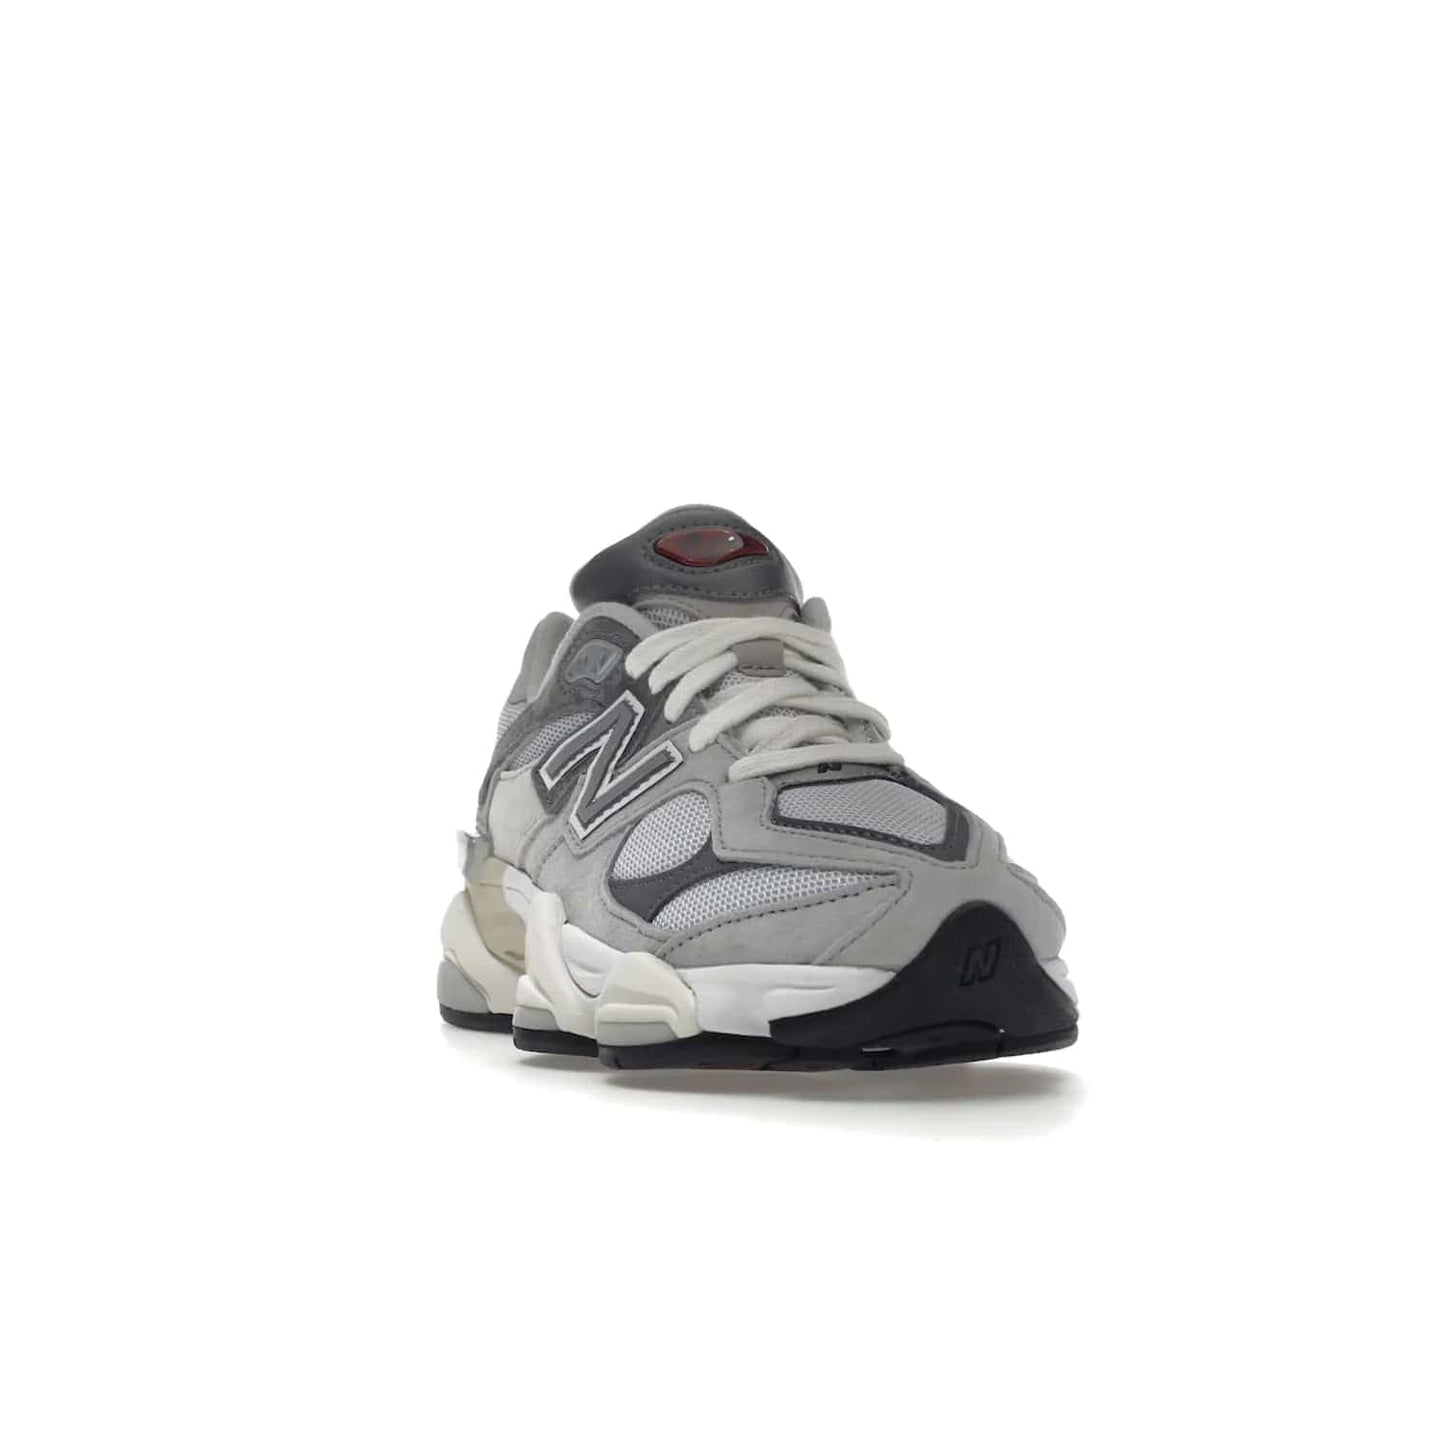 New Balance 9060 Rain Cloud Grey - Image 8 - Only at www.BallersClubKickz.com - New Balance 9060 Rain Cloud Grey is an early 2000s design with grey and off-white tones. Pigskin suede, mesh, and silver accents. "N" emblem and dual-density midsole on diamond outsole. ABZORB technology cushioning. September 2nd release for $150.